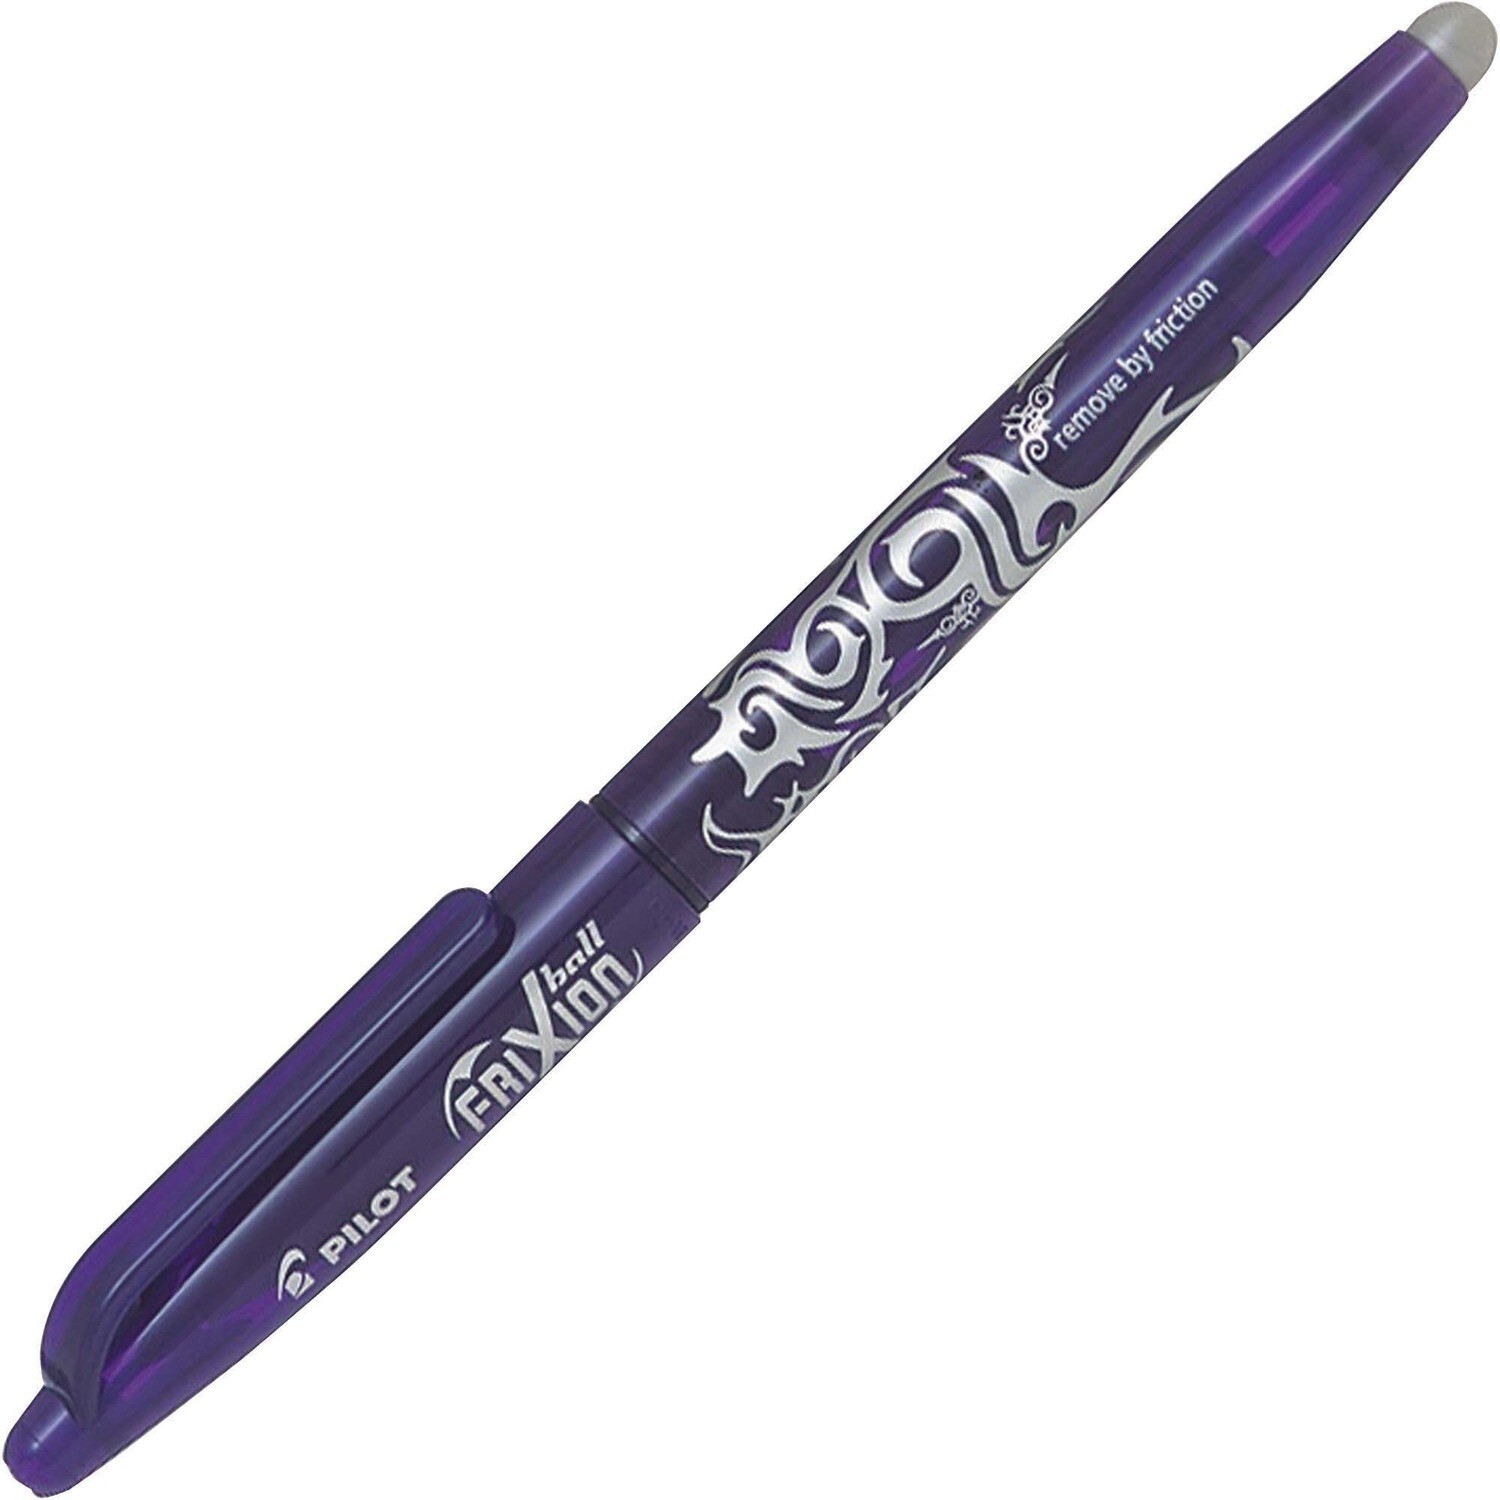 Pen, Erasable, Gel Rollerball, FriXion Purple, Box of 12, 0.7 Mm, Refillable